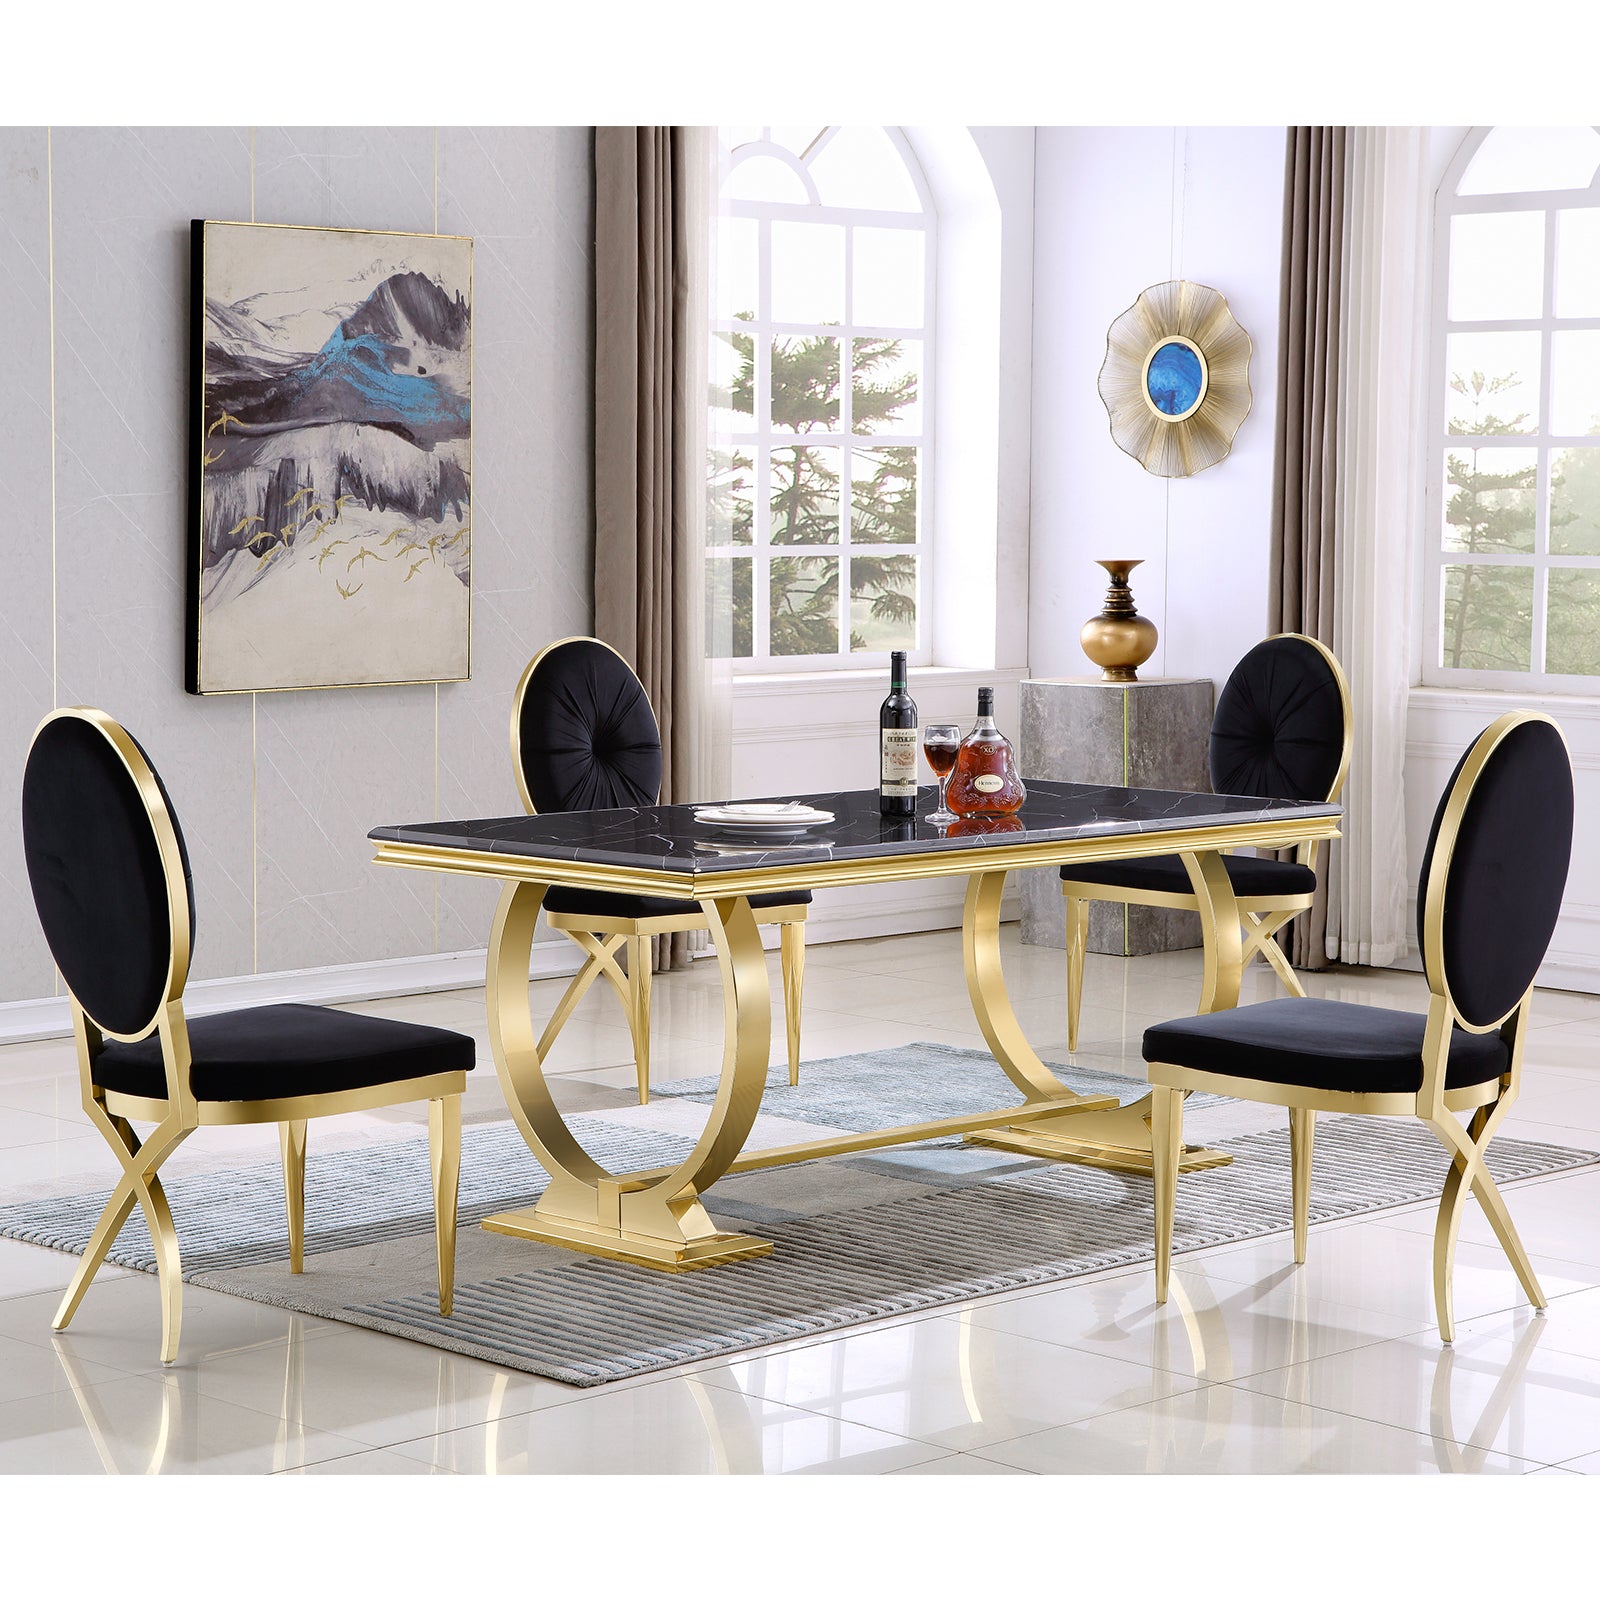 Wholesale Black King Louis dining chairs